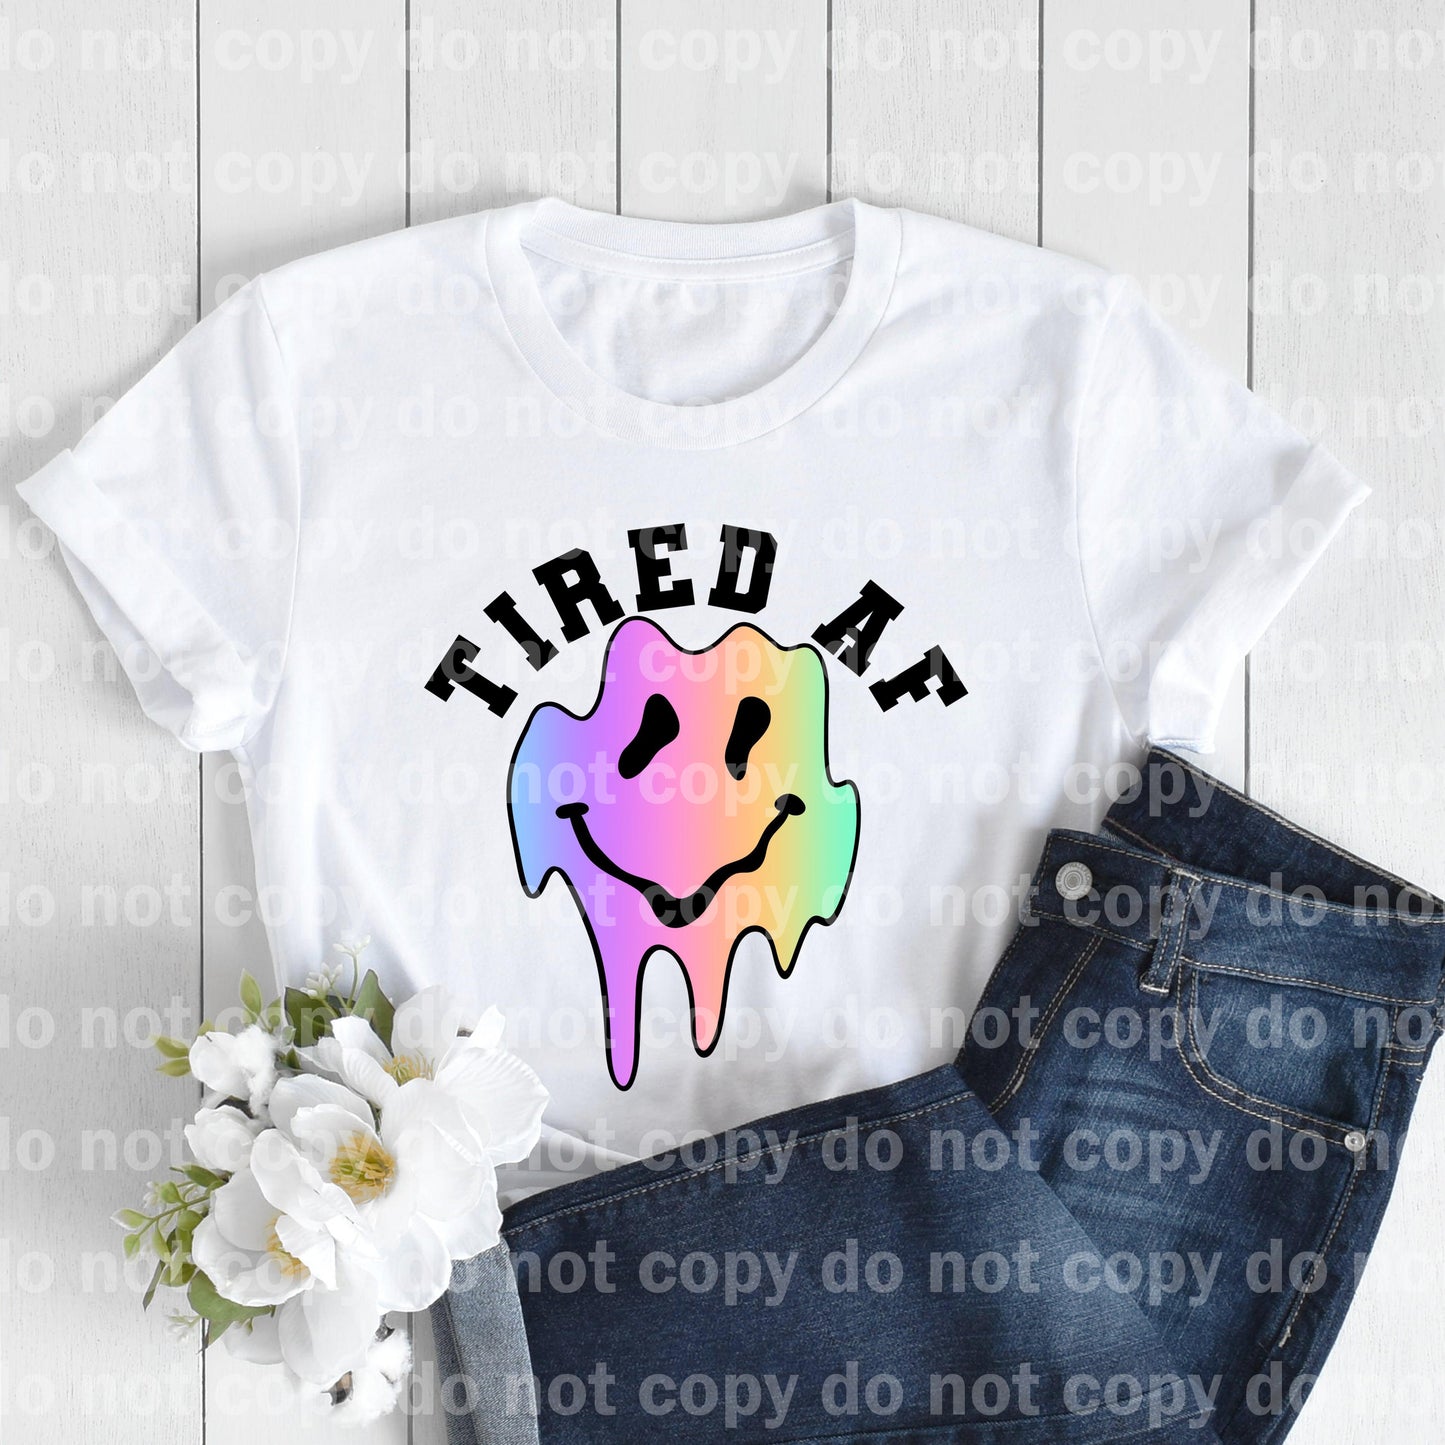 Tired Af Drippy Smiley Full Color/One Color Dream Print or Sublimation Print